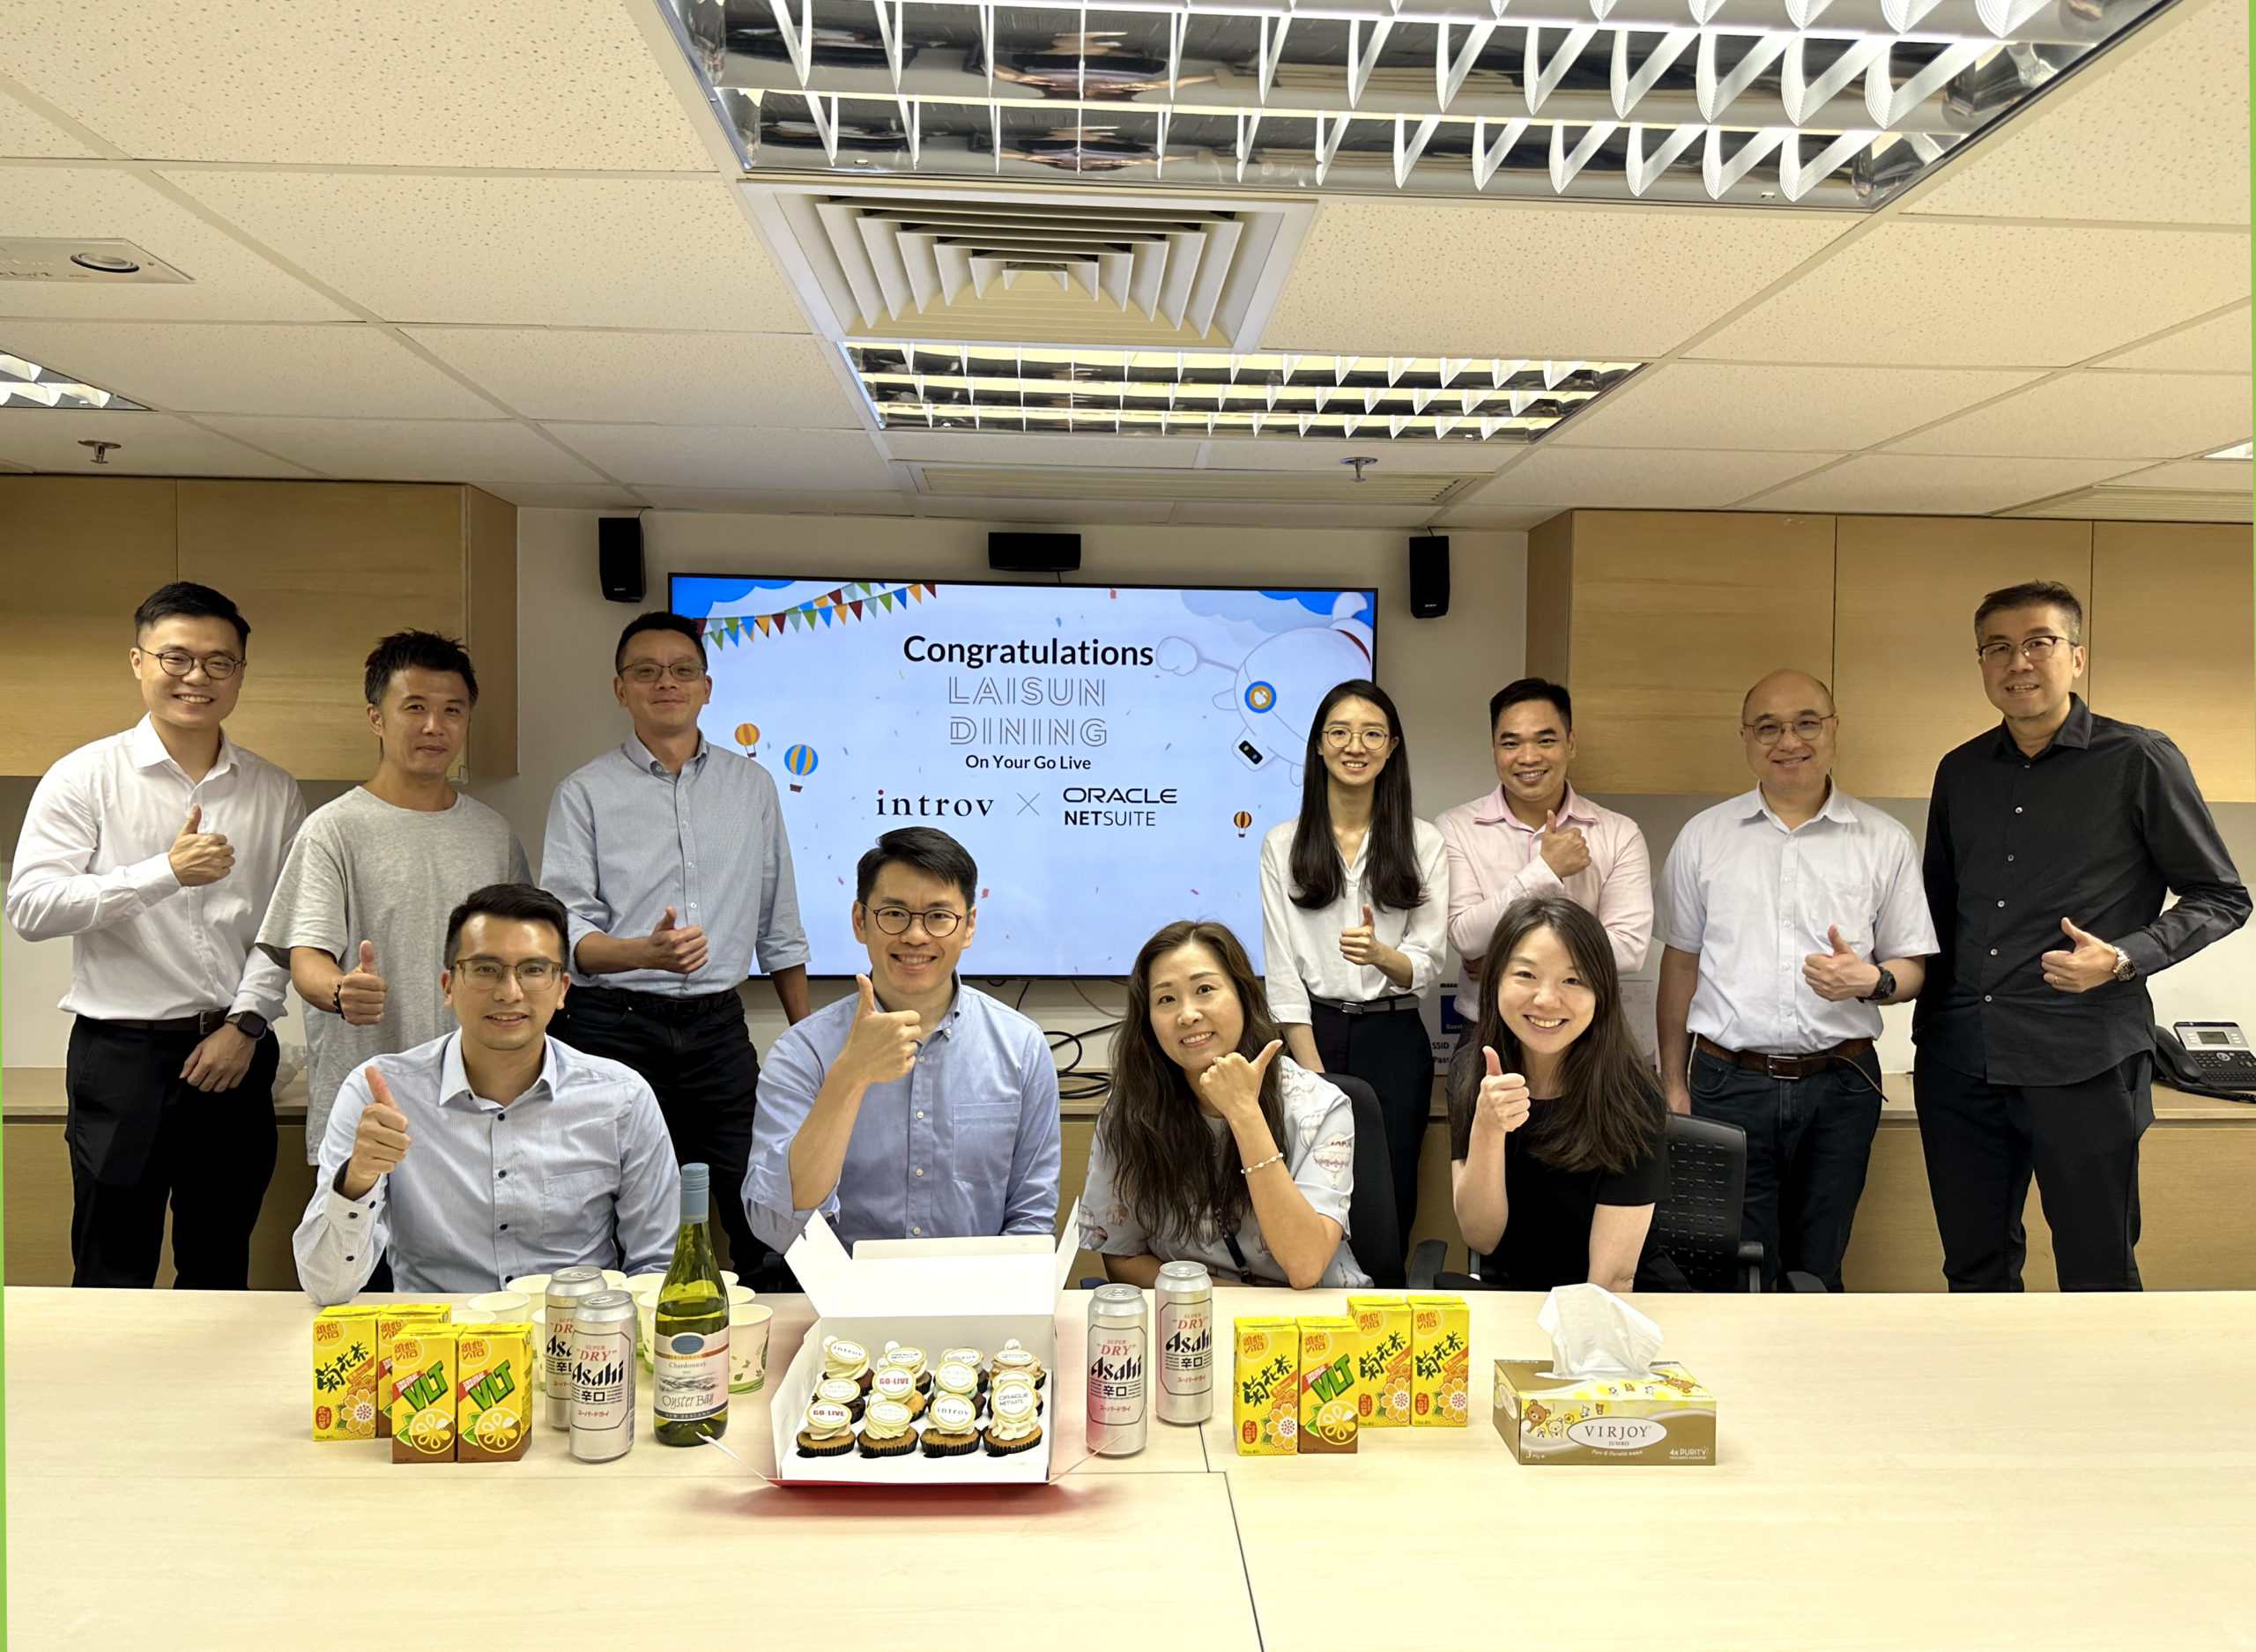 Celebrating Lai Sun Dining’s Successful Go-Live with Introv & Oracle NetSuite Cloud ERP